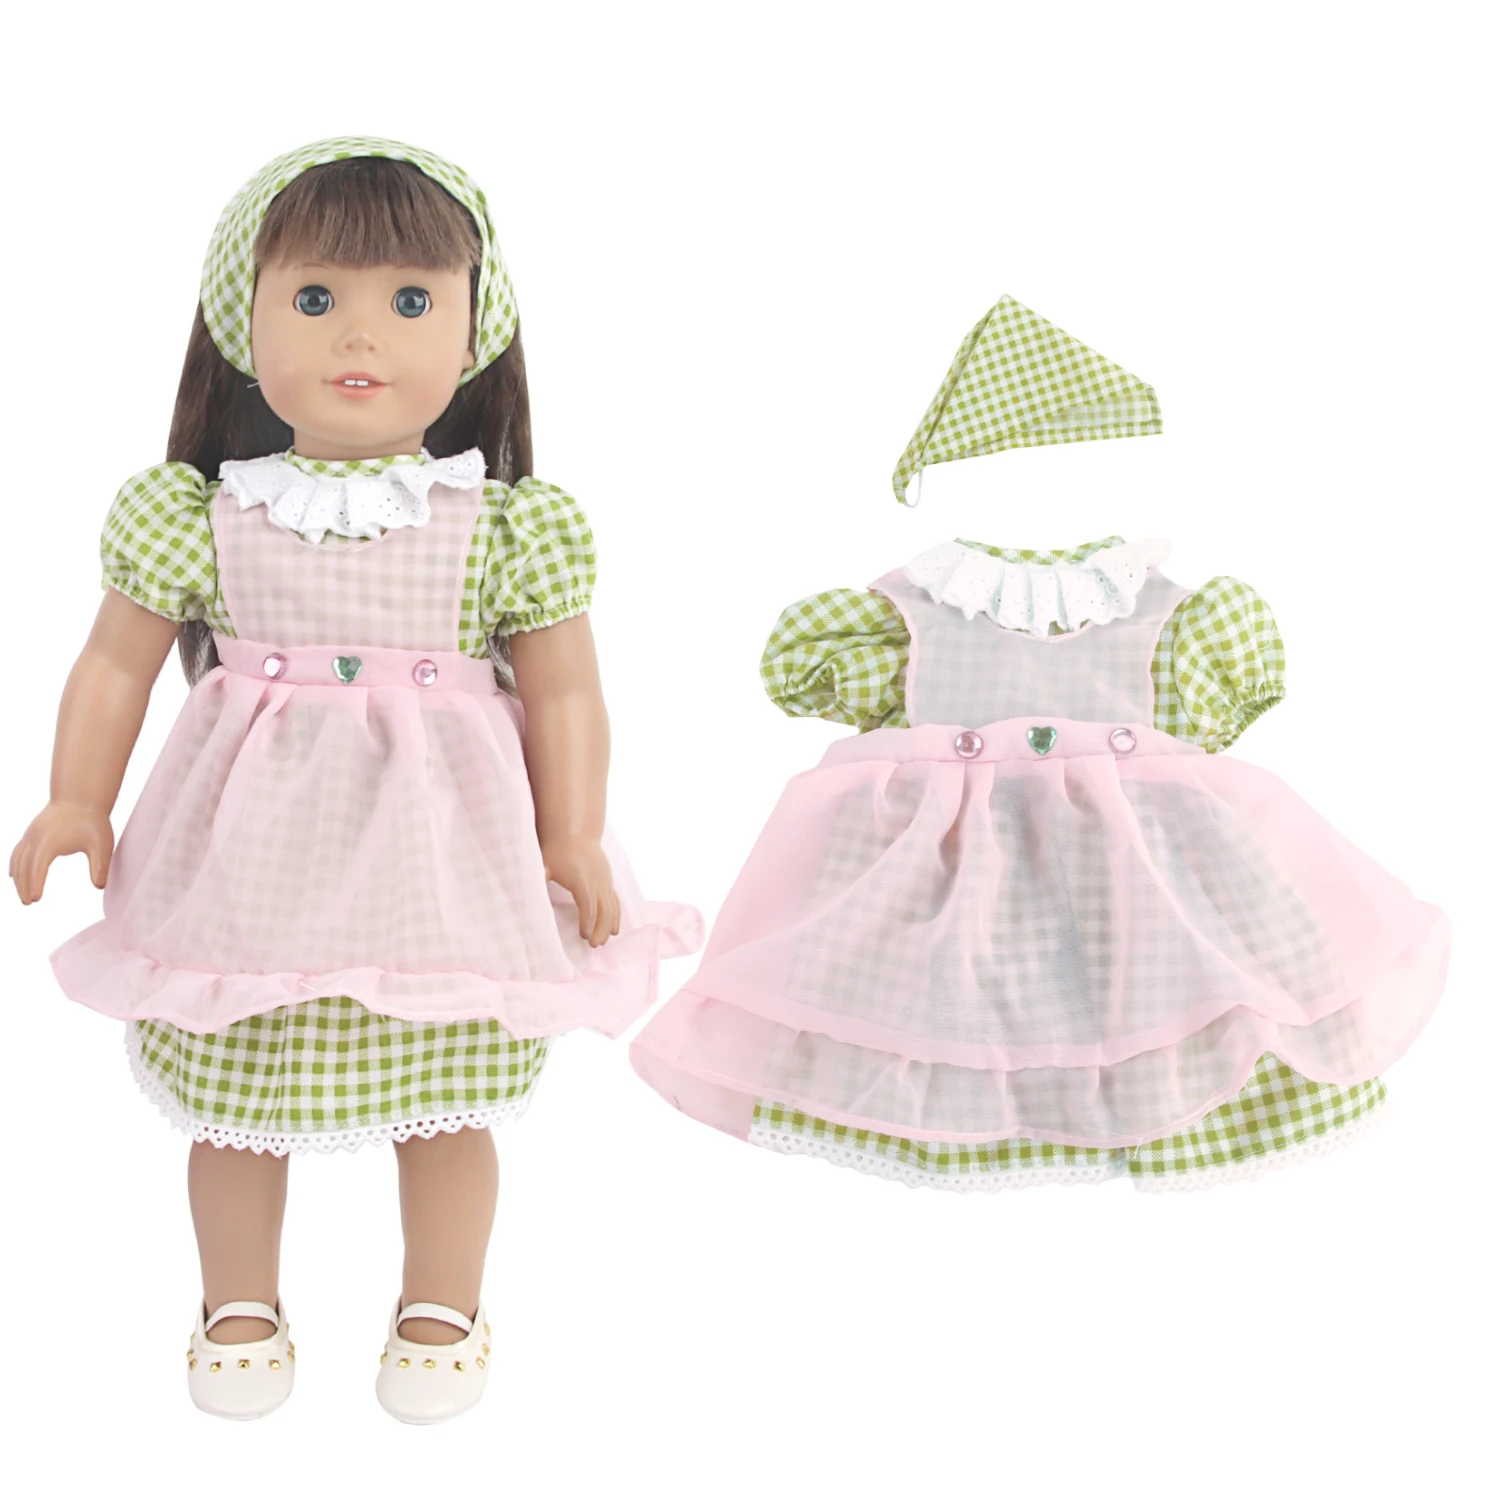 New Doll Clothes 18 Inch Girl Doll Dress Princess Skirt with Hat